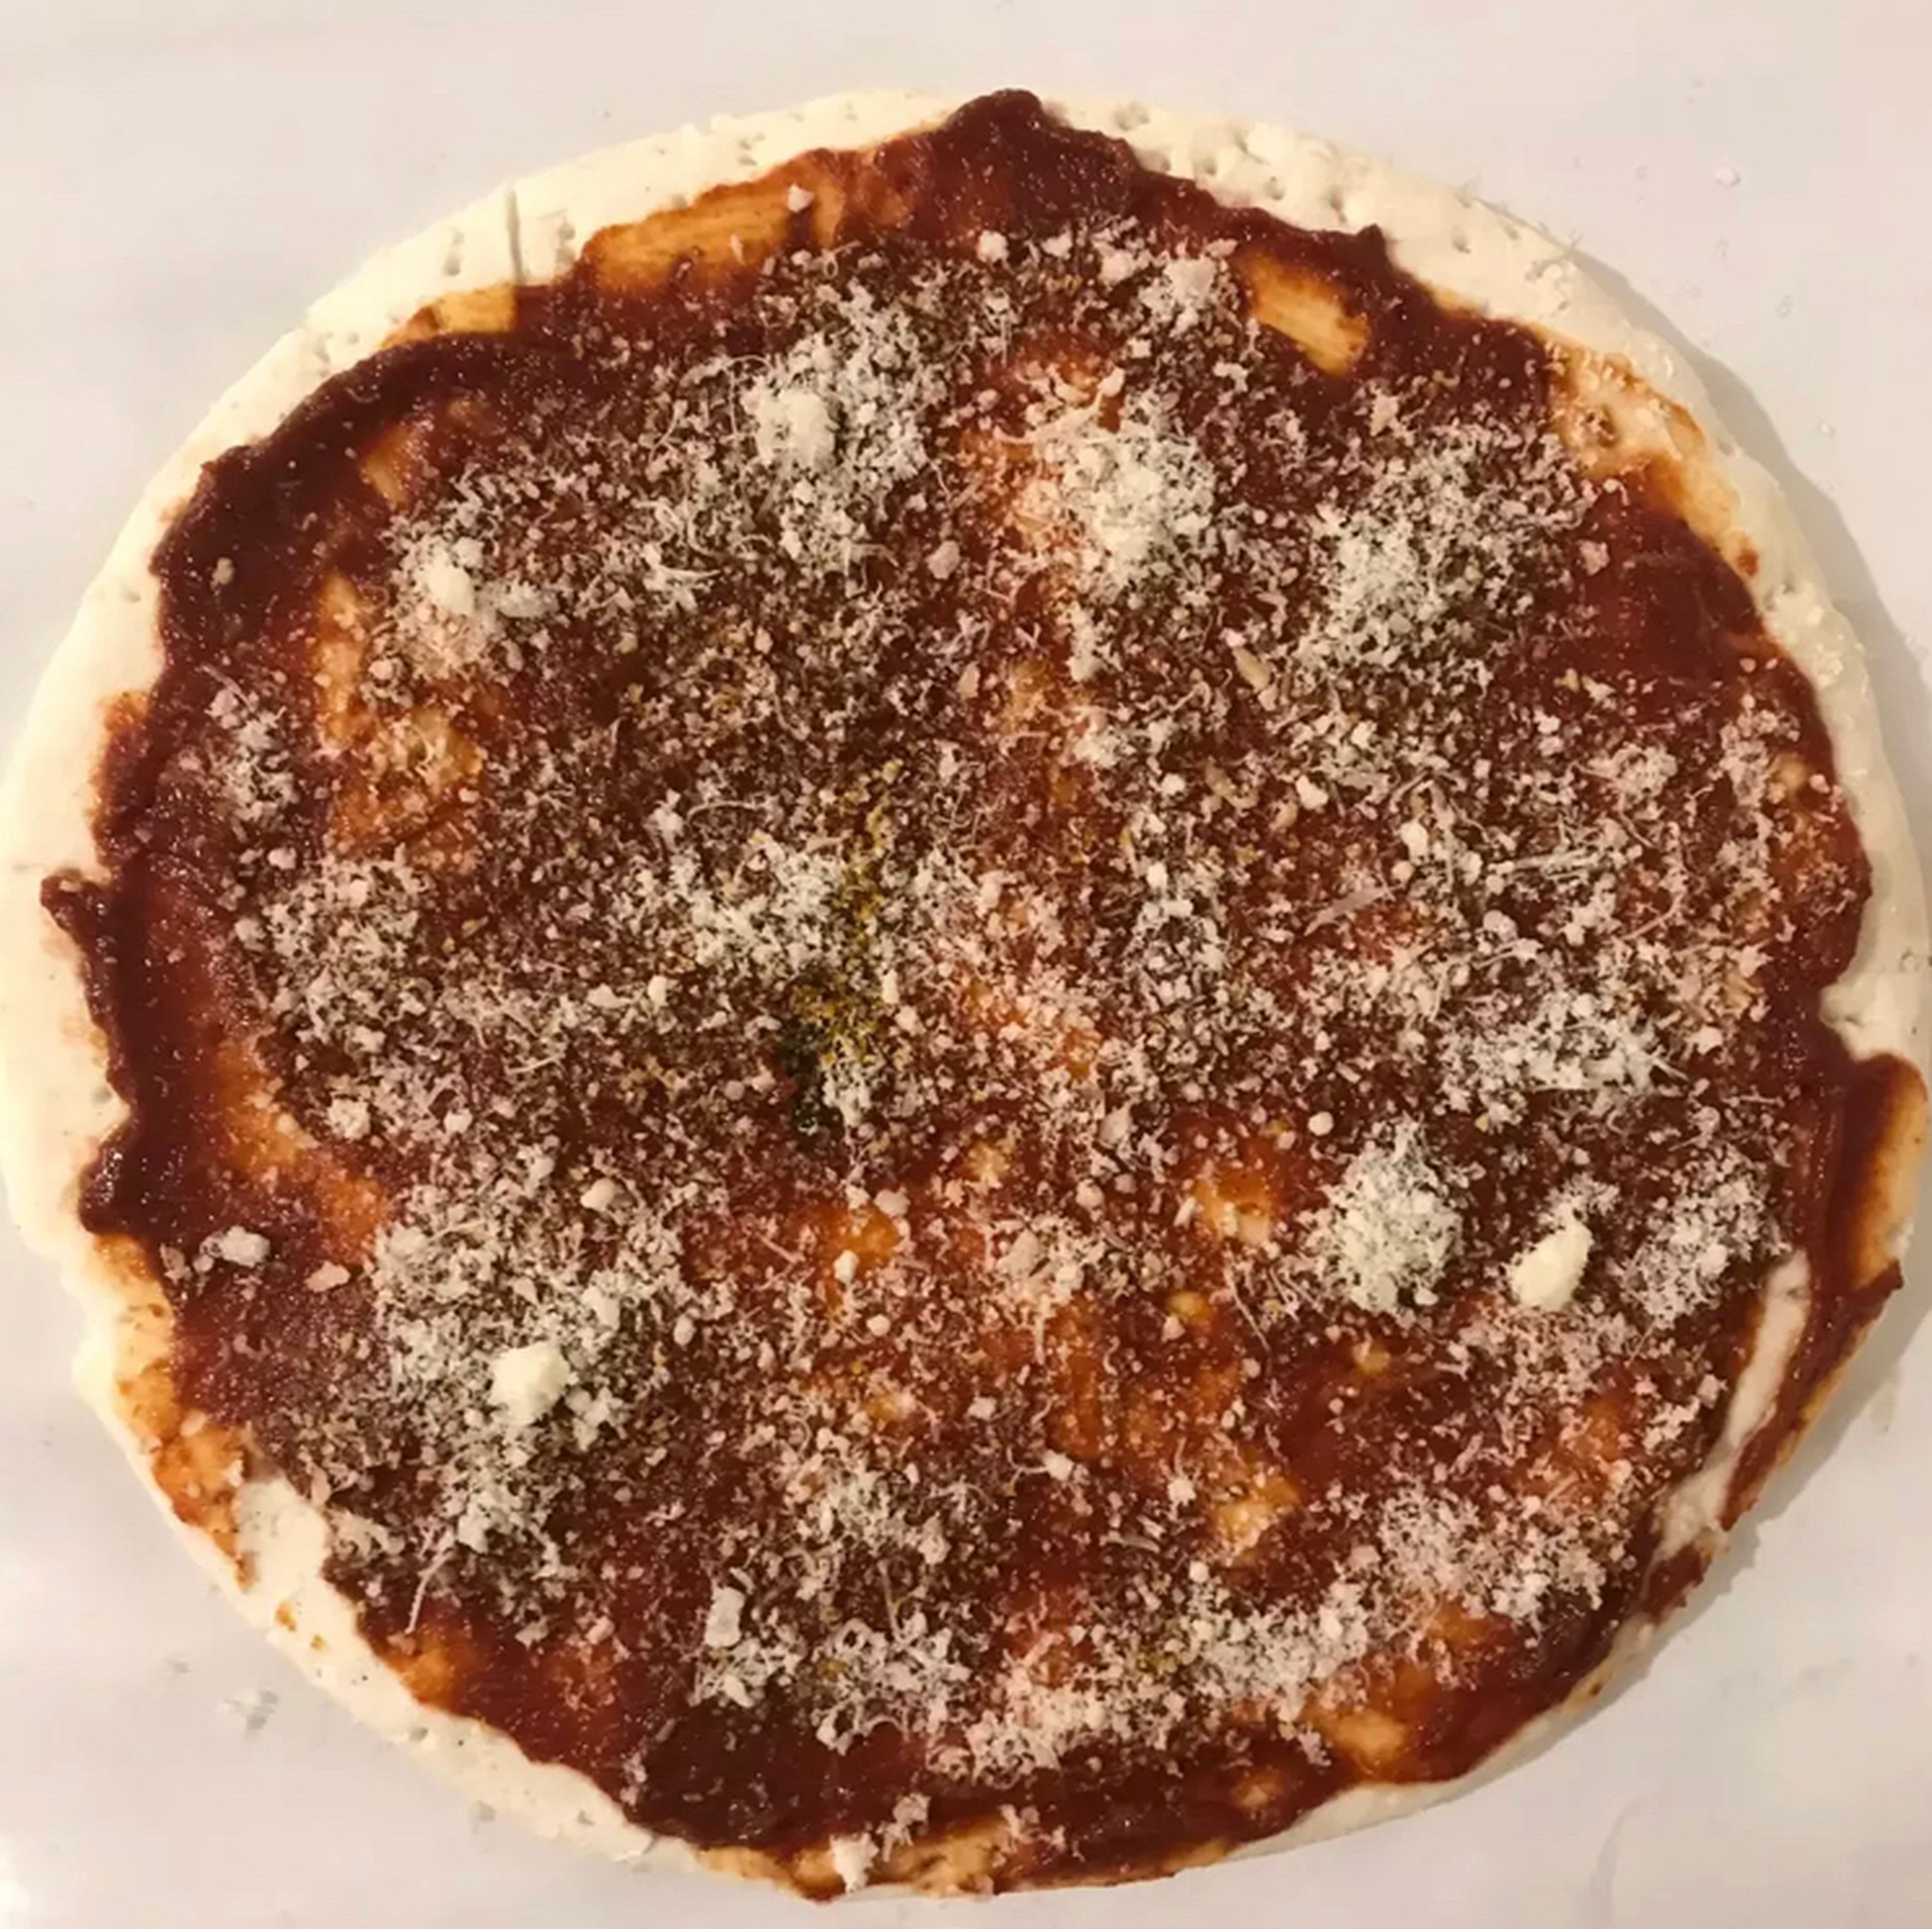 First, preheat the oven to 180 degrees Celsius. If we use homemade dough, it is better to semi-cook it first or put the pizza in the oven for 20 minutes first so that the dough cooks faster. Spread the marinara sauce on the dough and sprinkle with Parmesan cheese powder.